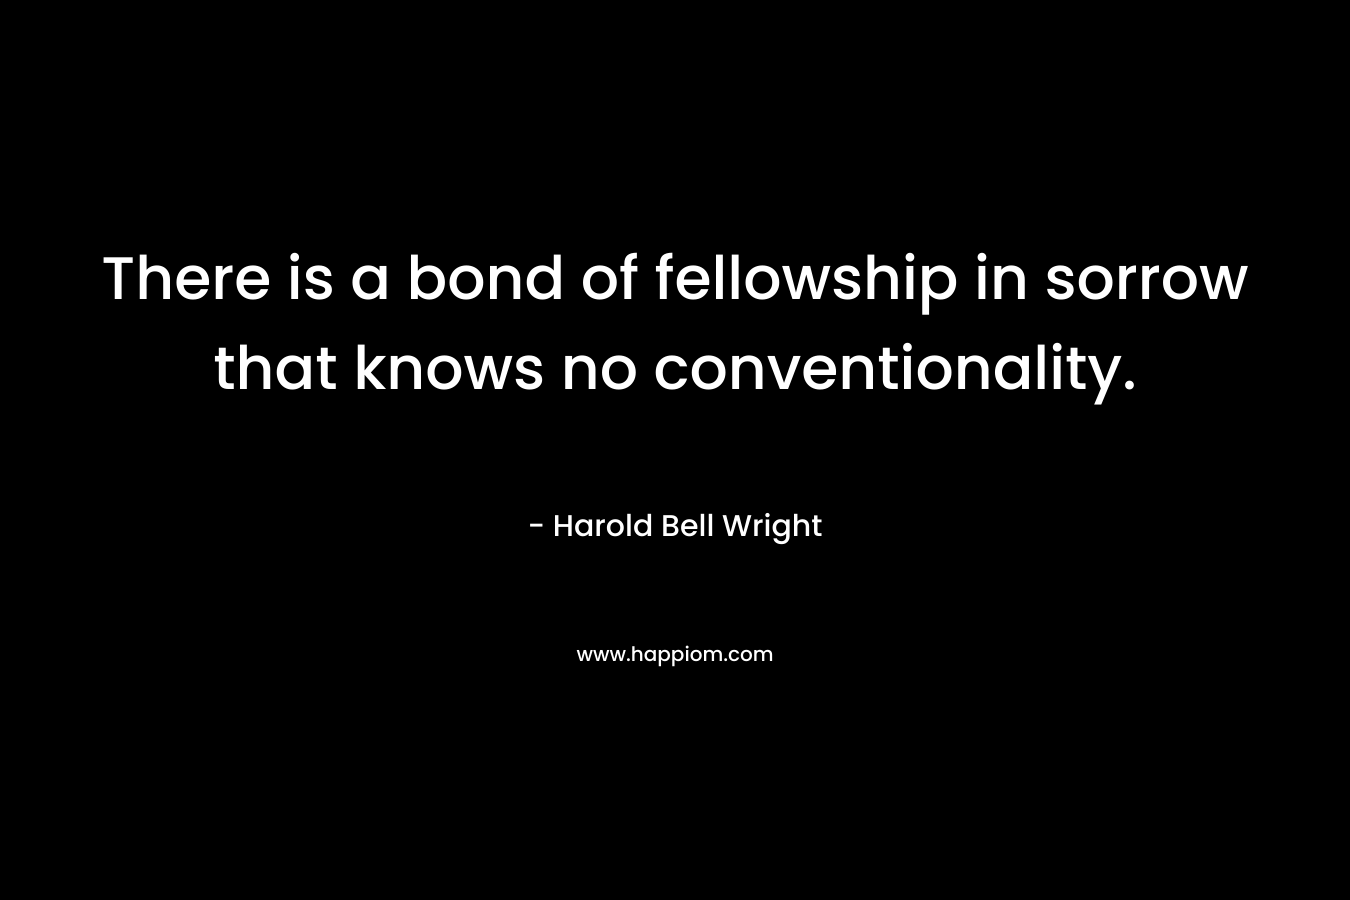 There is a bond of fellowship in sorrow that knows no conventionality. – Harold Bell Wright